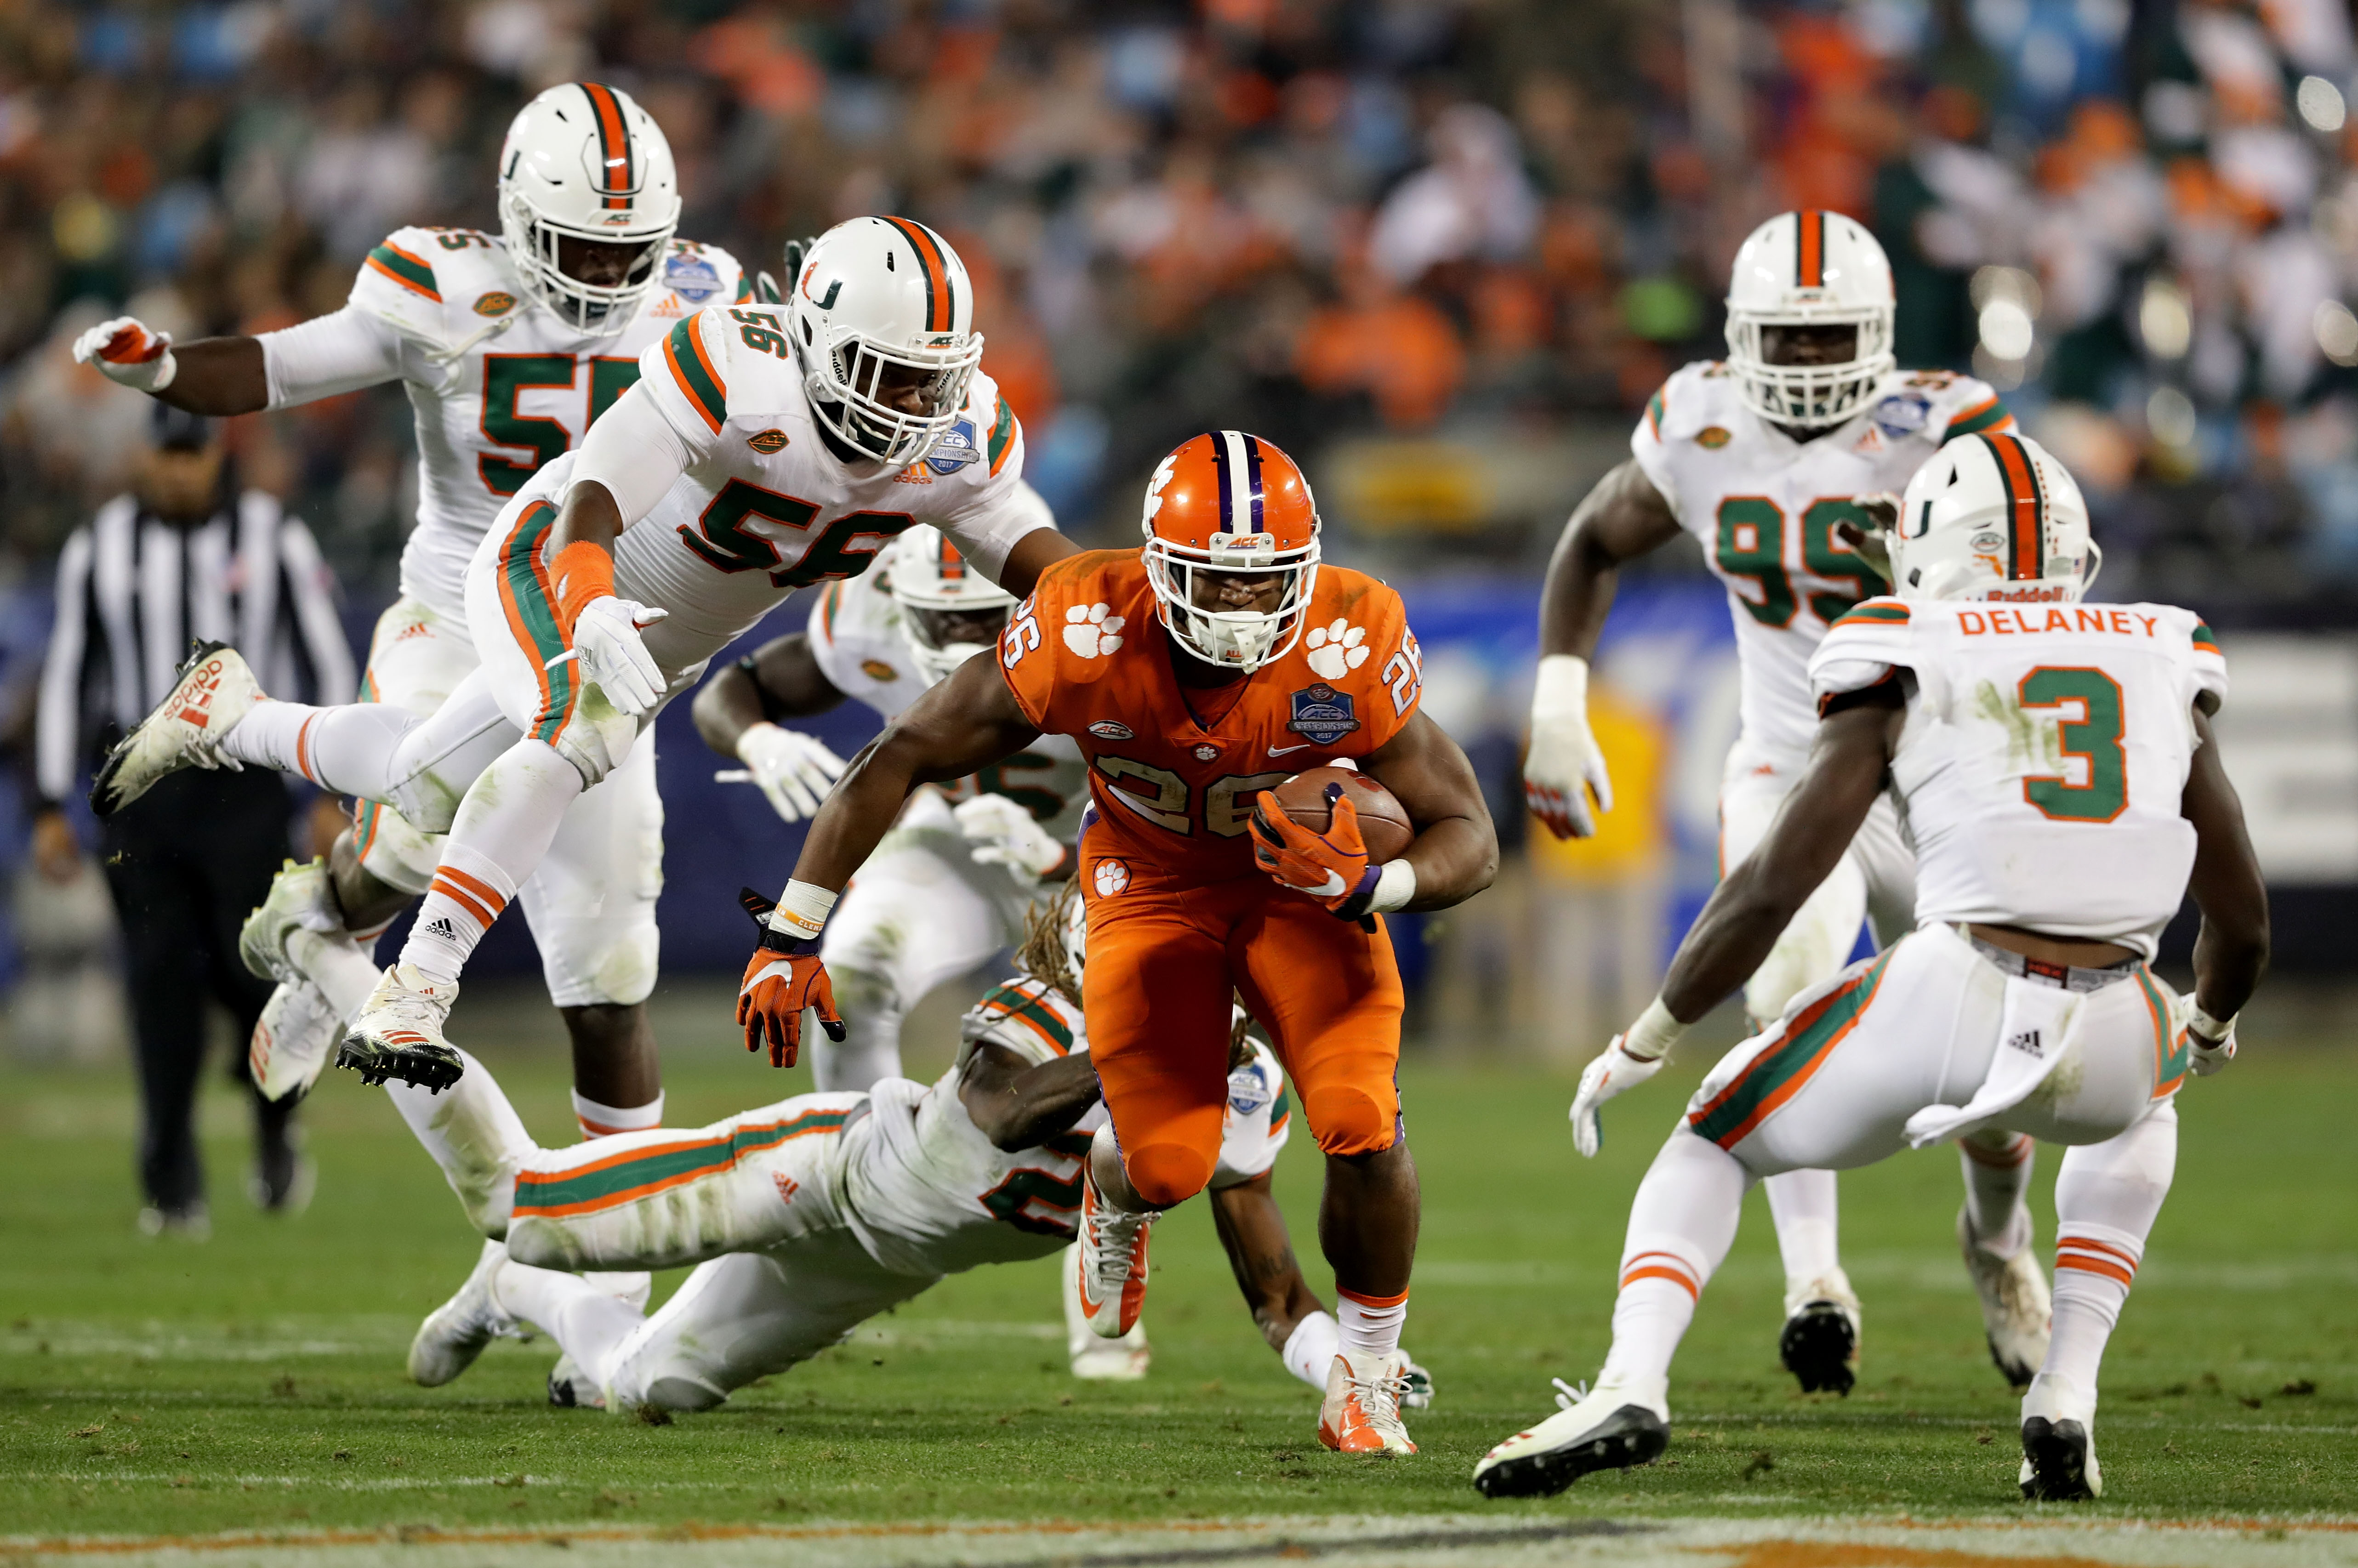 Clemson Tigers Vs Miami Hurricanes Free Live Stream Score Time Tv Channel How To Watch Online 10 10 2020 Oregonlive Com